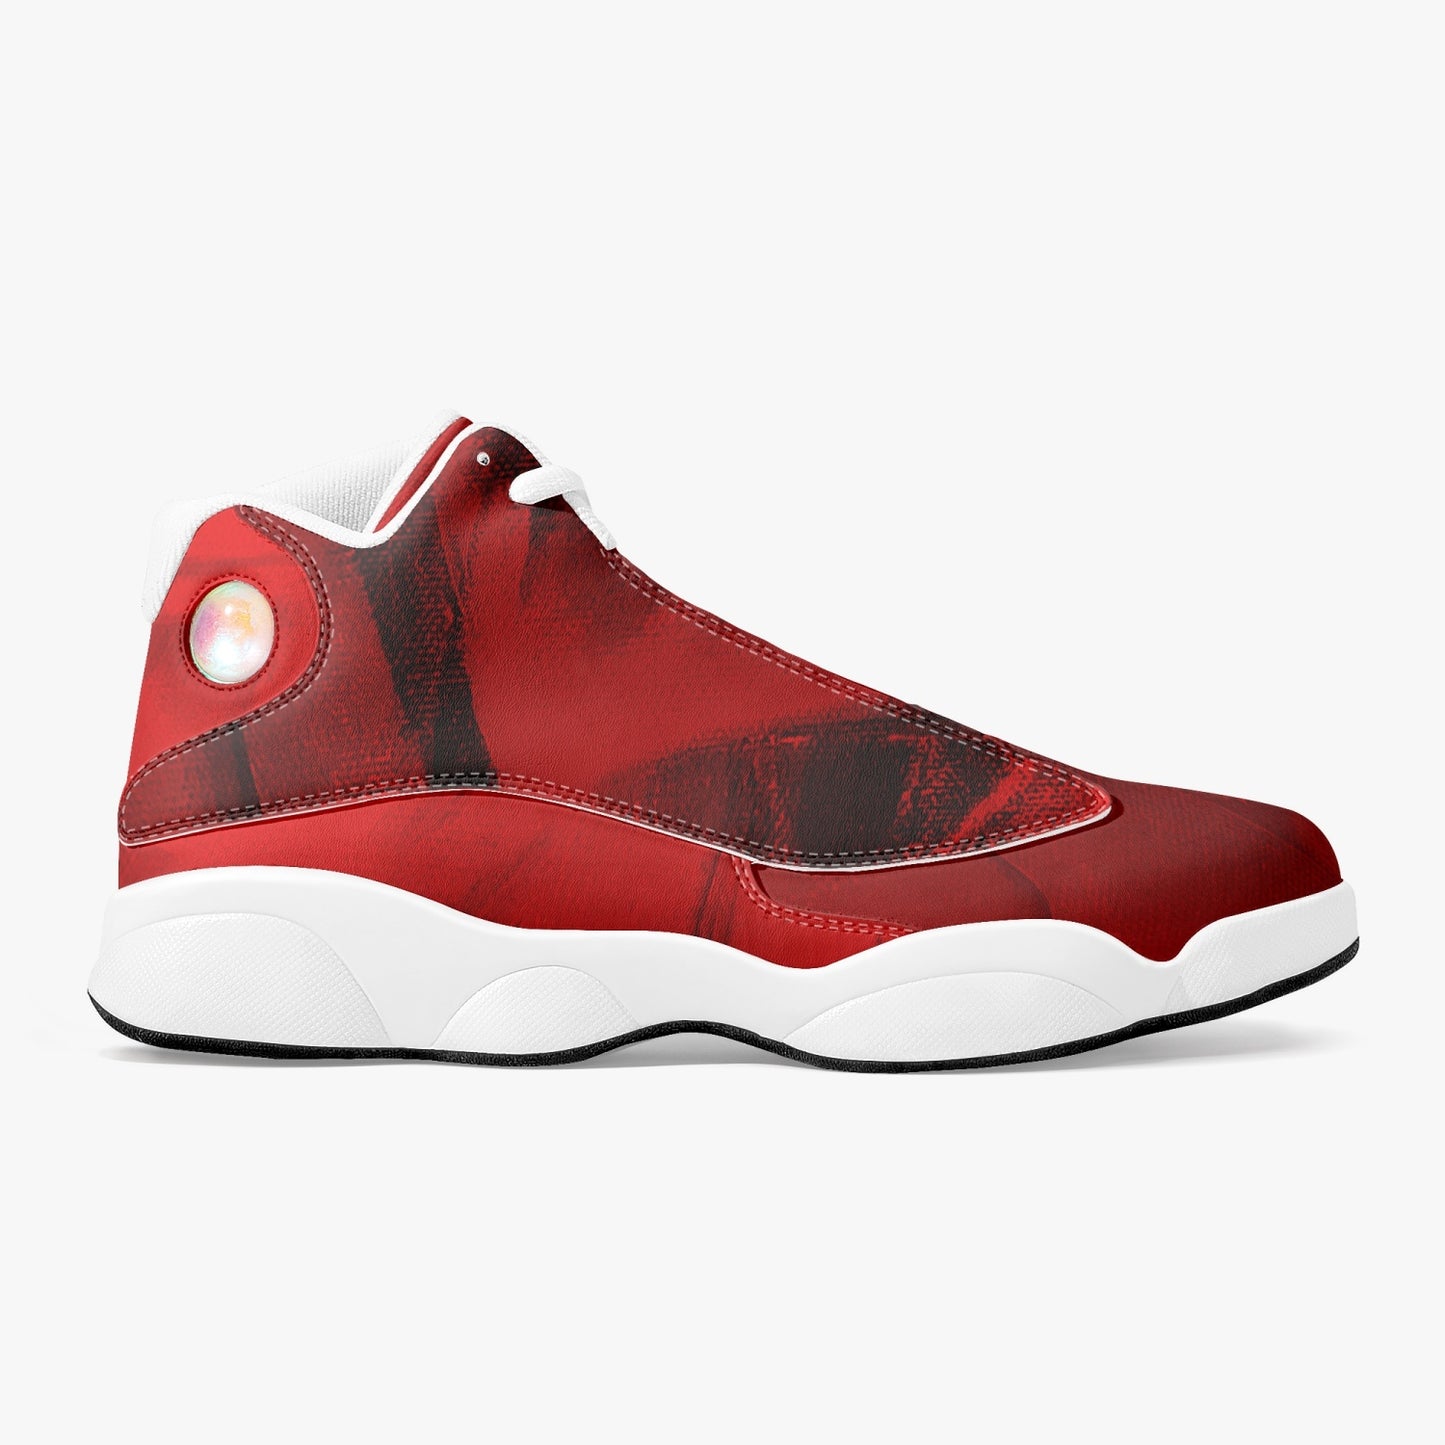 "Redone" premium leather basketball sneakers